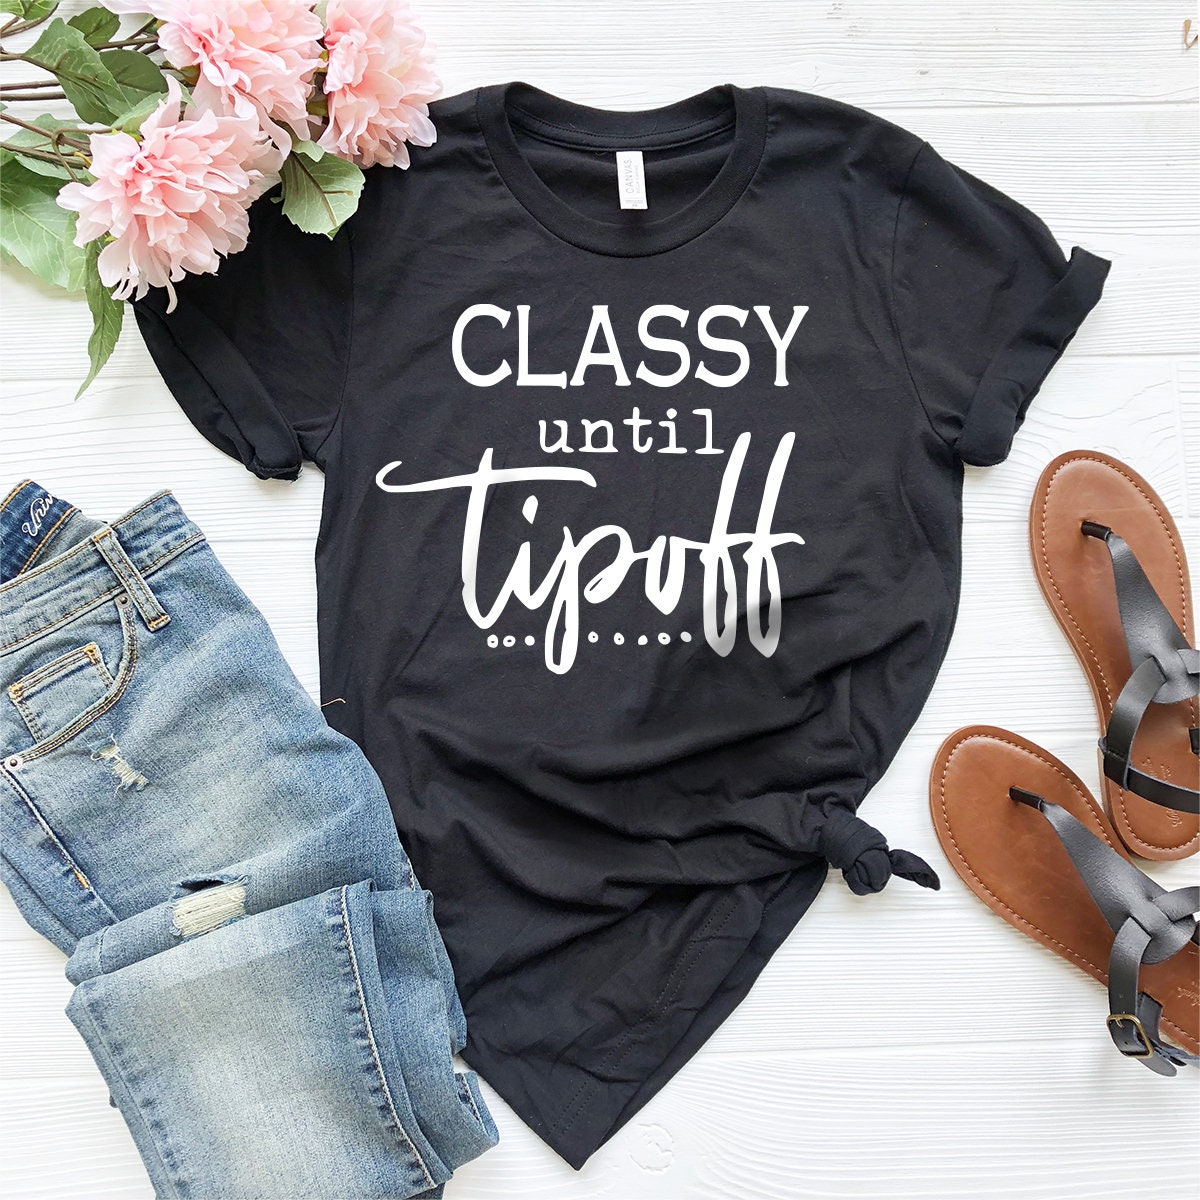 Classy Until Tipoff Shirt, Basketball Mama Shirt, Funny Basketball Shirt, Sports Mom Shirt, Basketball Mother Tee, Mothers Day Shirt - Fastdeliverytees.com